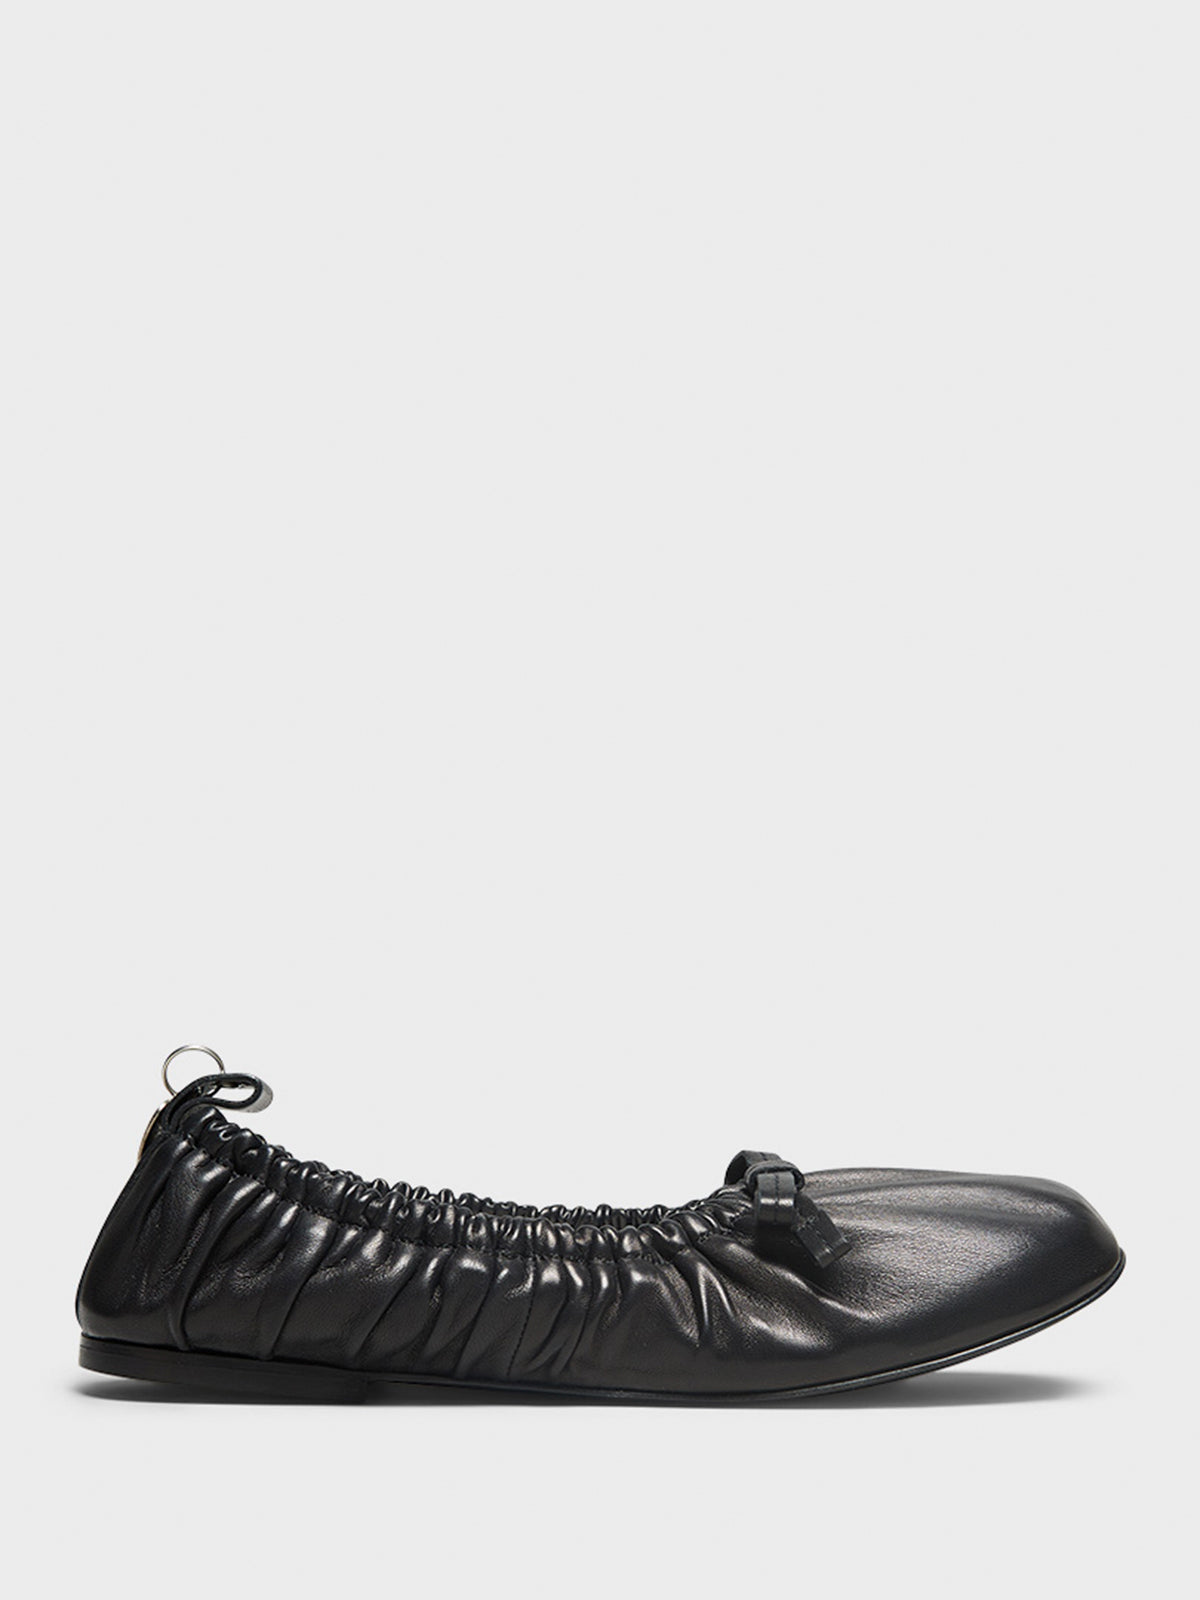 Acne Studios - Leather Ballet Flats in Black